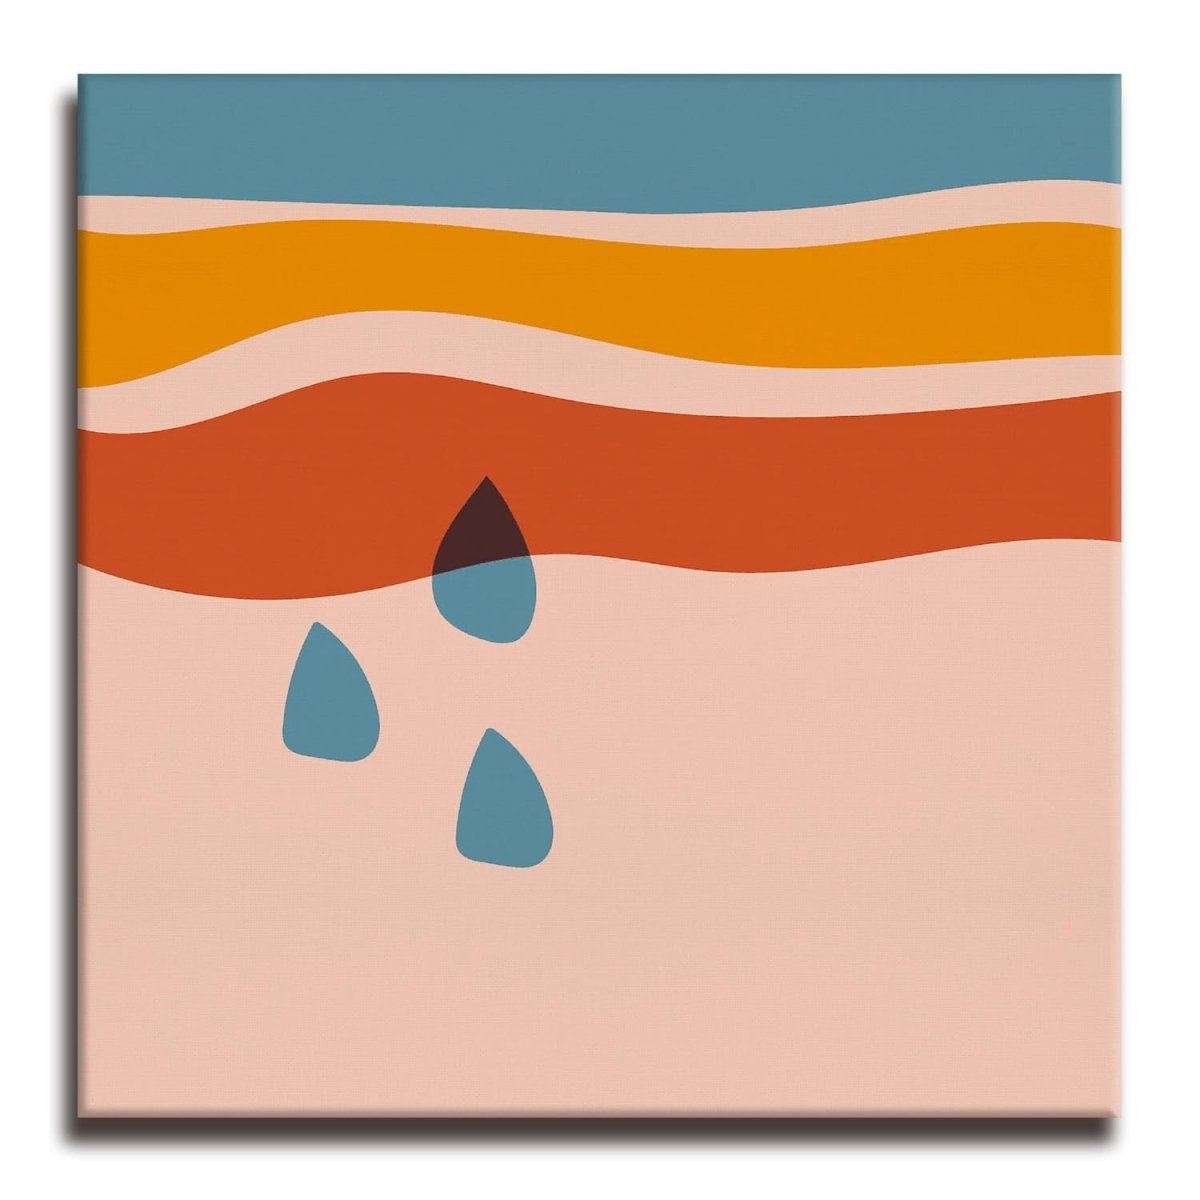 Teardrops on Canvas Wall Painting (36 x 36 Inches)